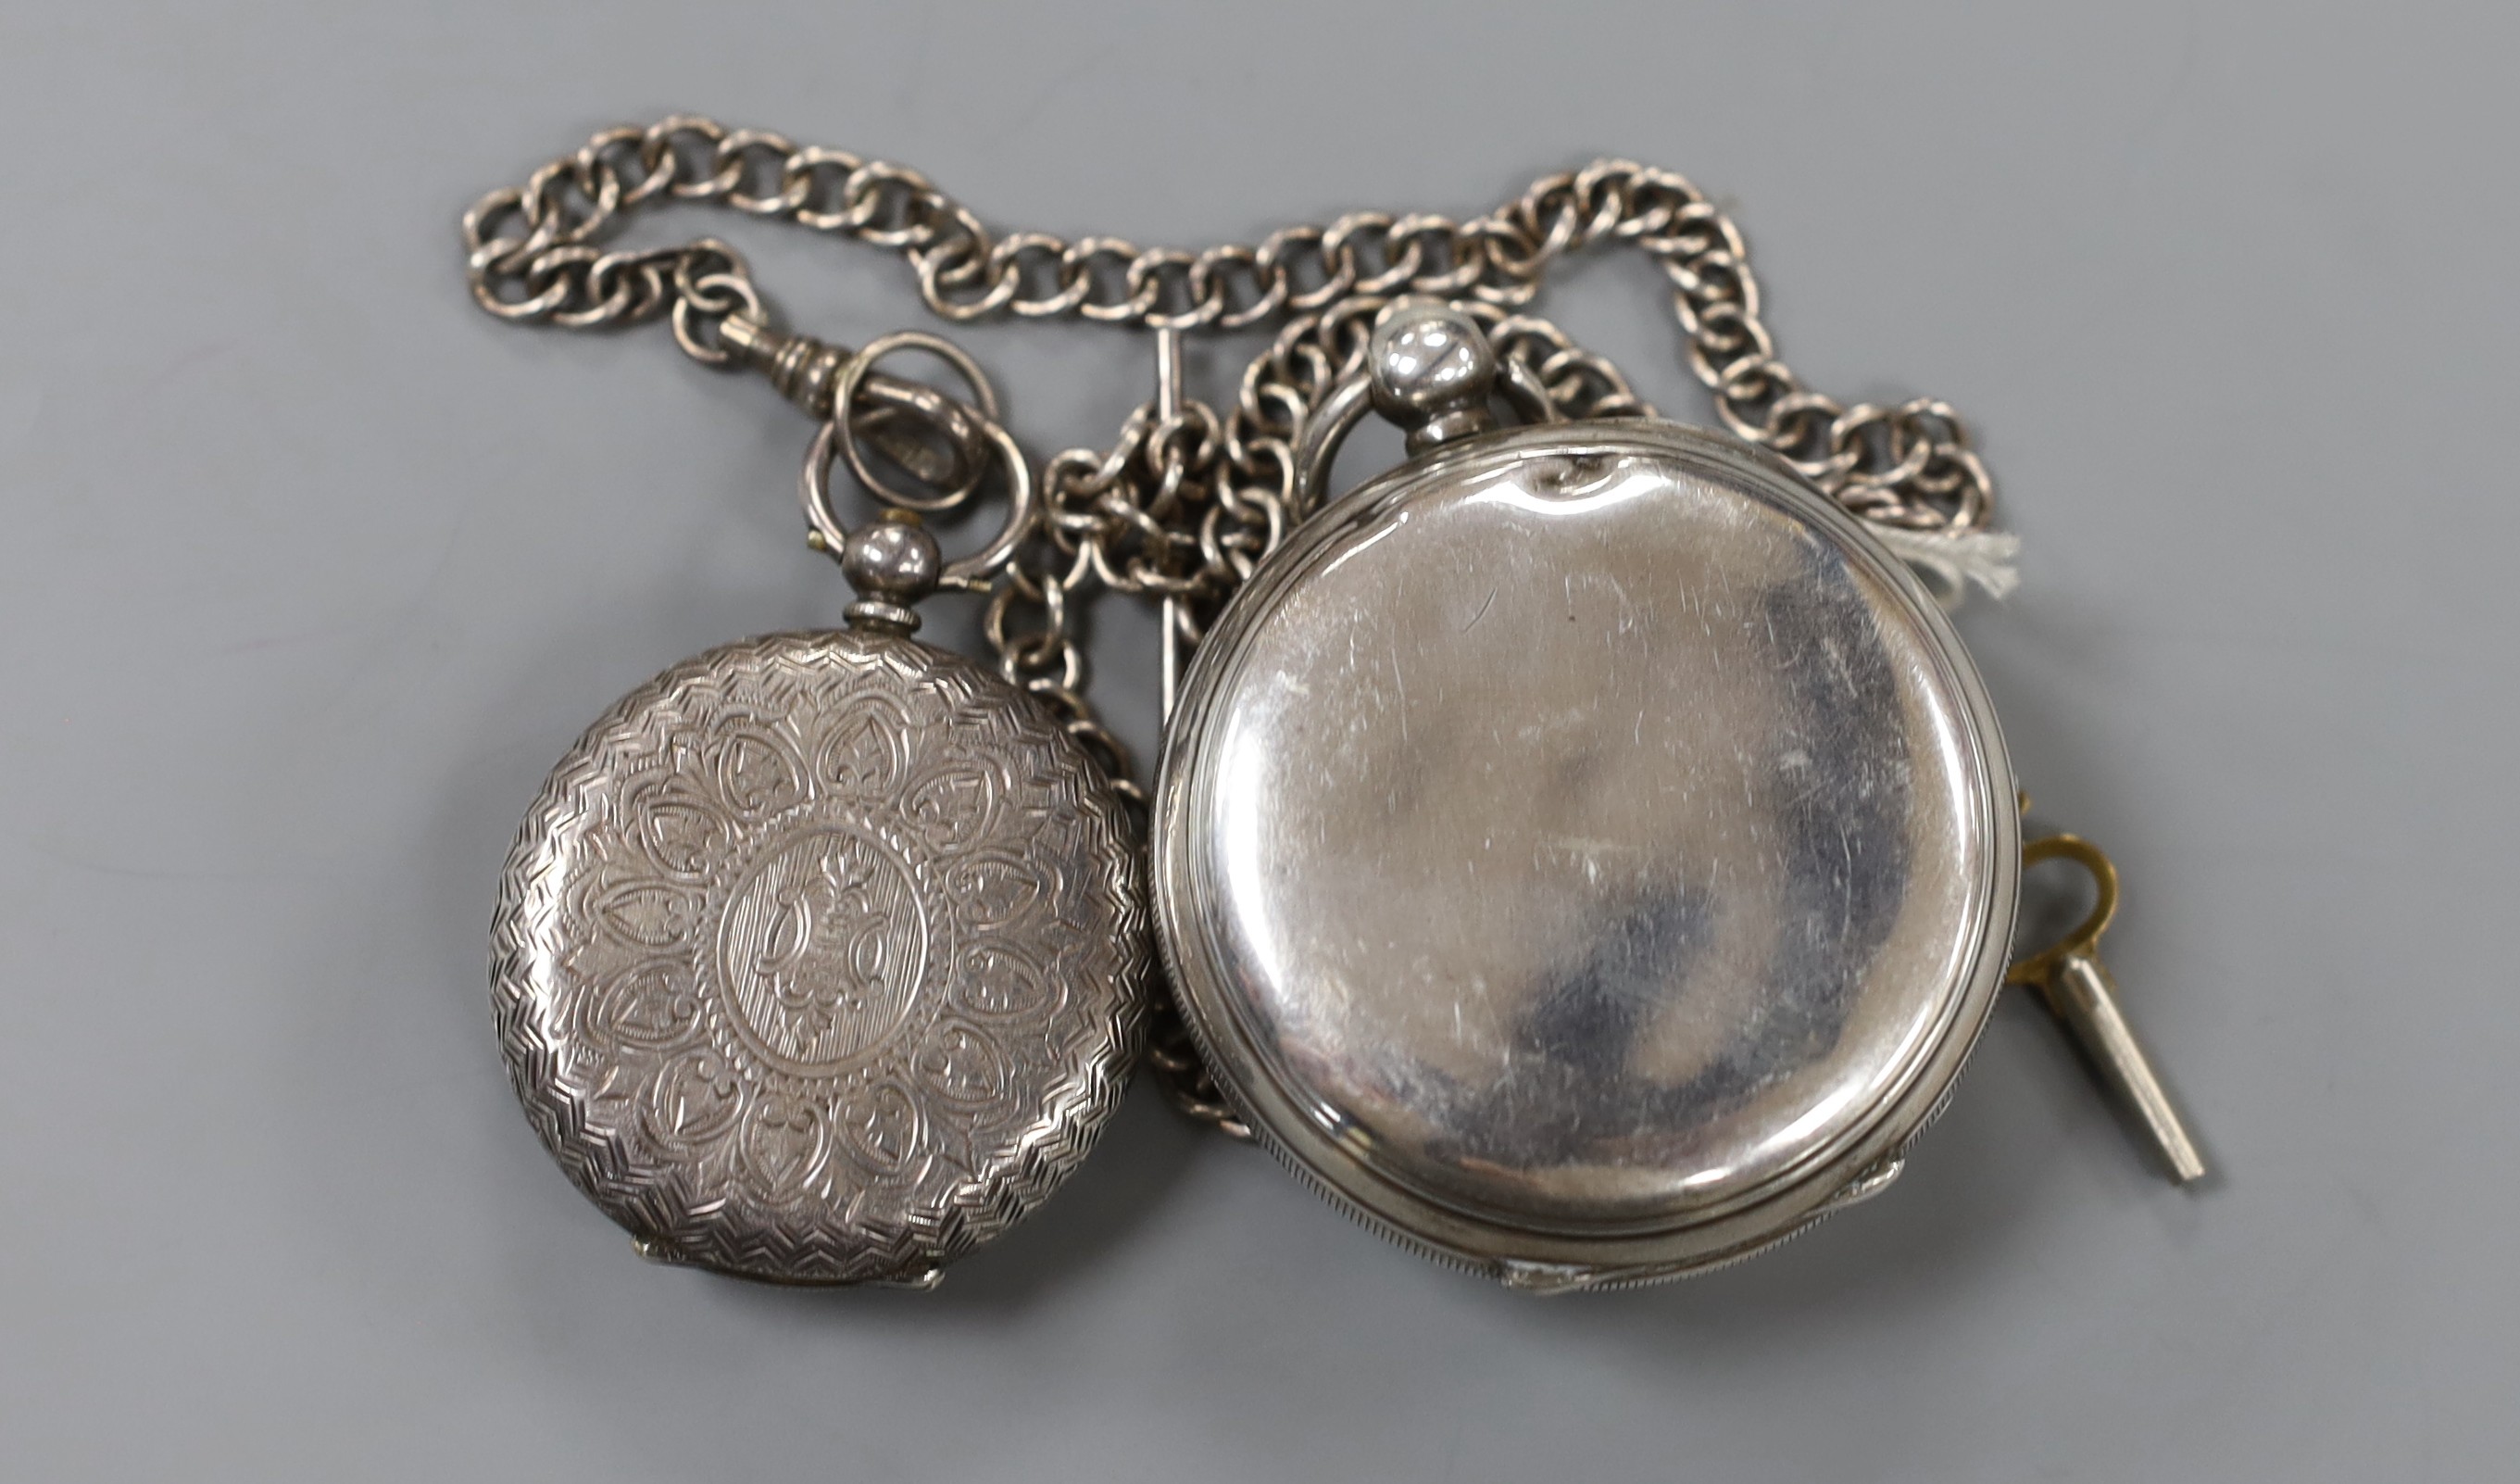 An Edwardian Waltham silver open face keywind pocket watch and a Swiss 935 white metal fob watch, on a white metal albert.